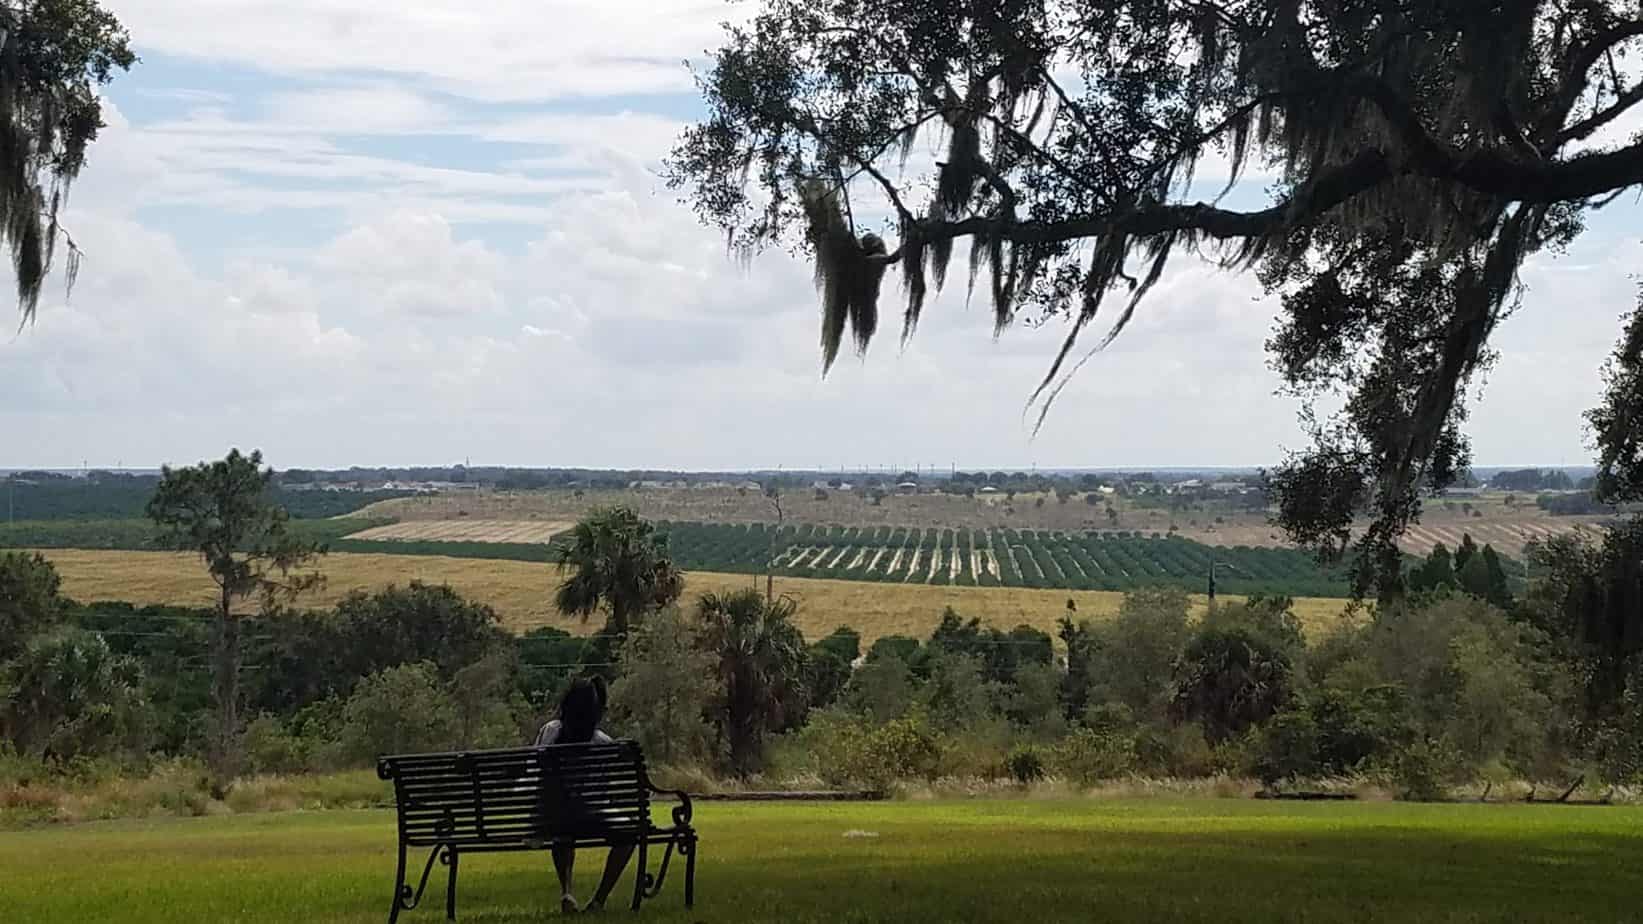 View of Orange Orchards at Bok Tower Gardens